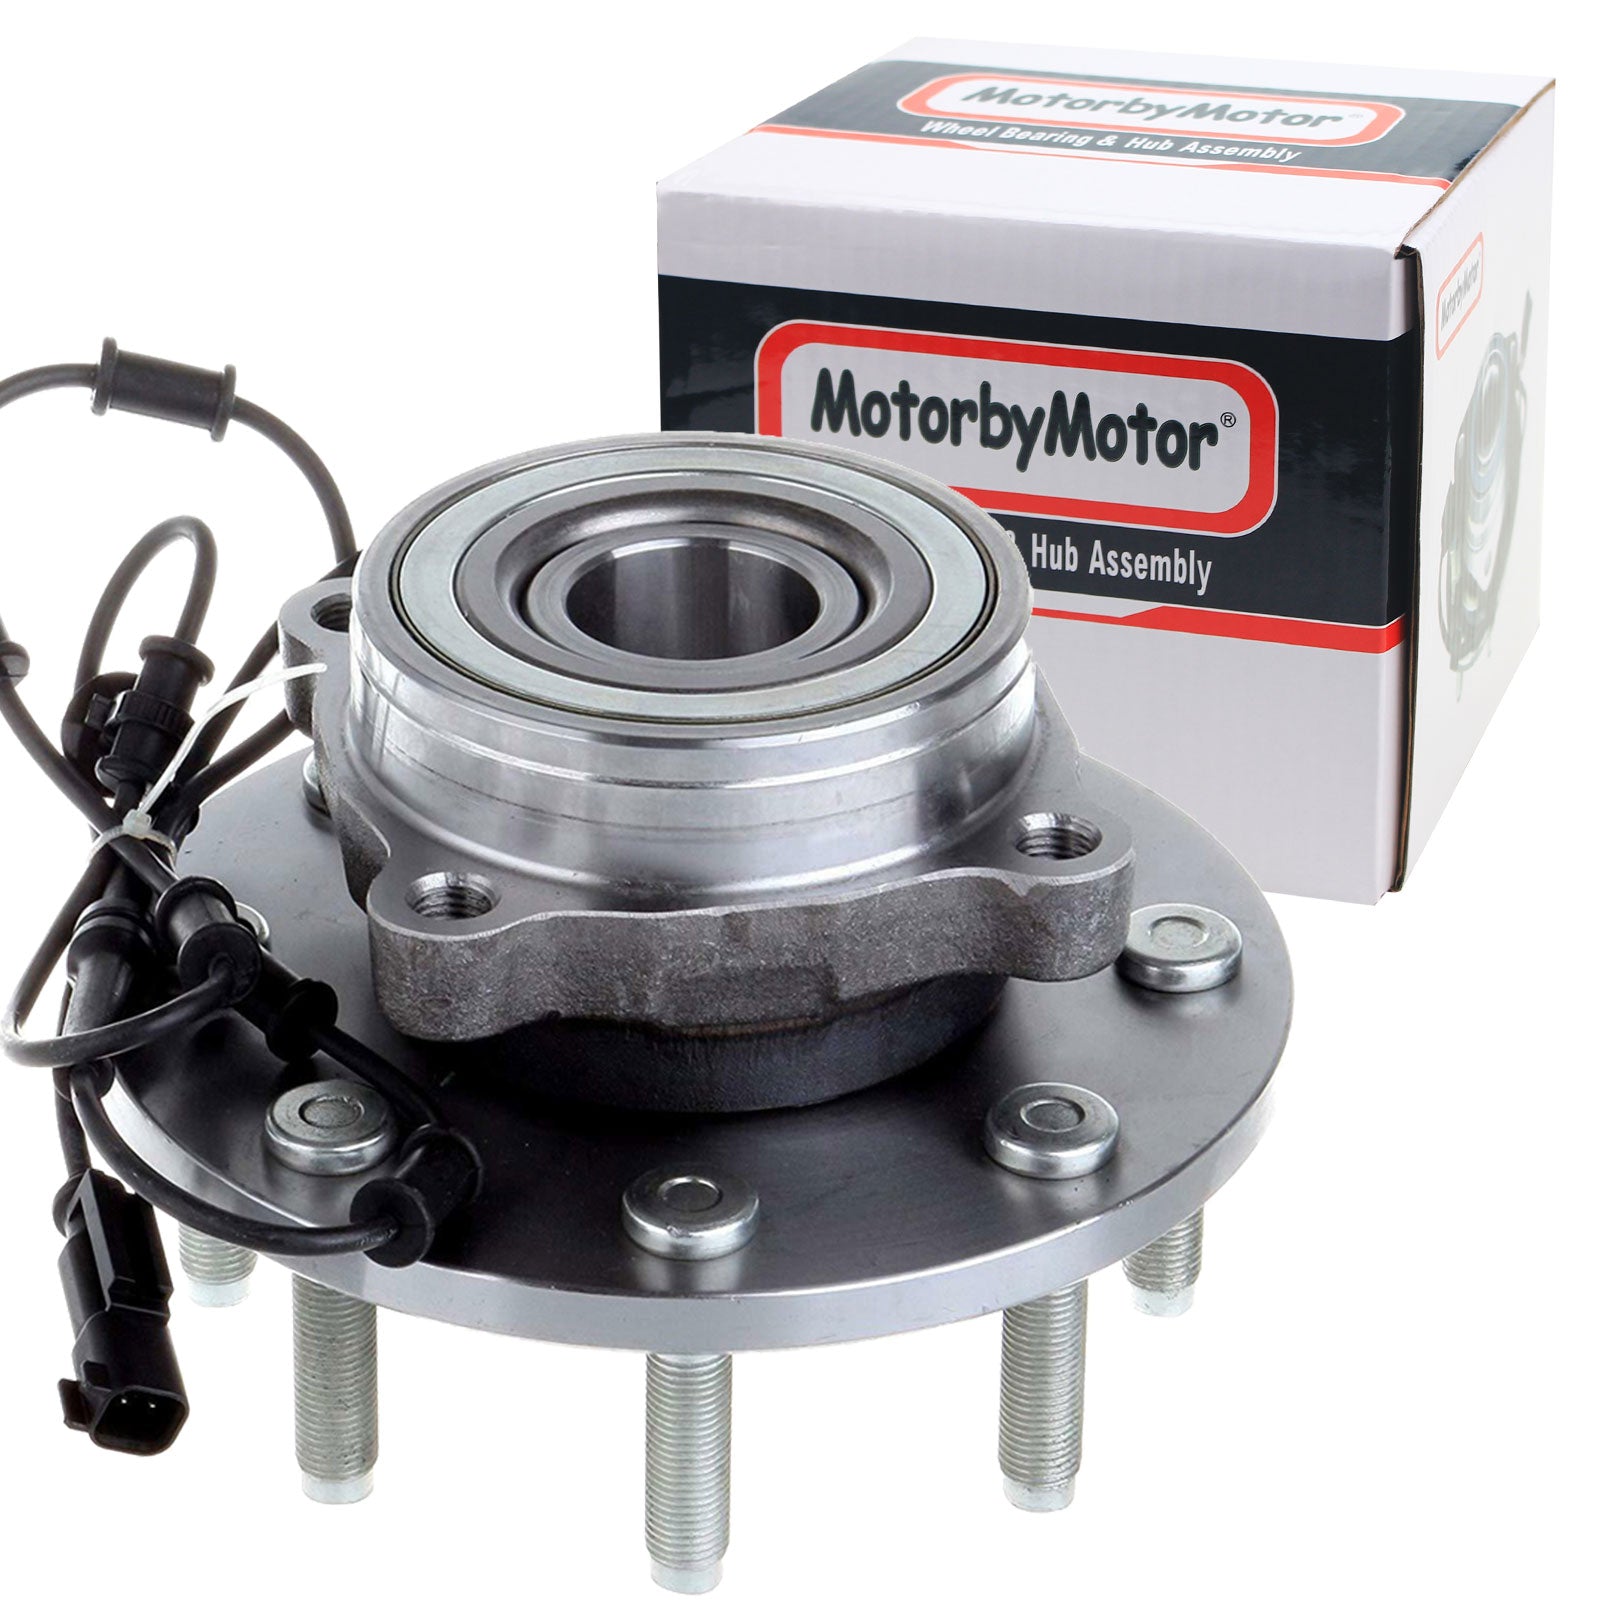 MotorbyMotor 515101 (4WD) Front Heavy Duty Wheel Bearing Assembly with 8 Lugs 2006-2008 Dodge Ram 1500 2500 3500 Wheel Bearing and Hub Assembly (4x4, w/ABS) MotorbyMotor